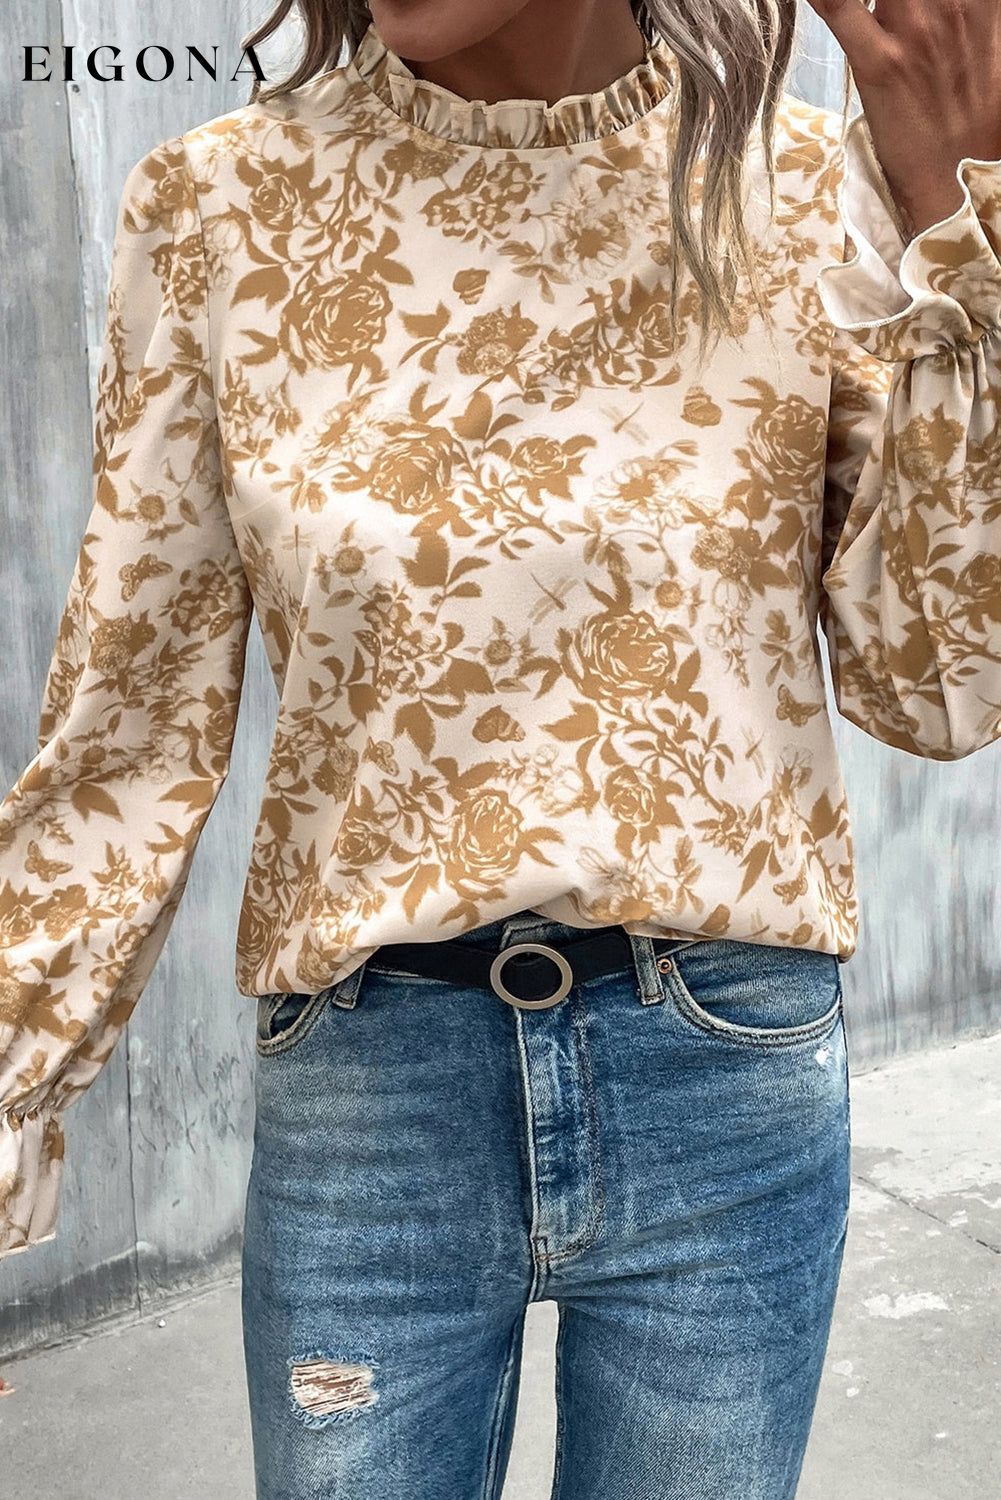 White Floral Print Frilled Neckline Flounce Sleeve Blouse clothes long sleeve shirt long sleeve shirts long sleeve top long sleeve tops shirt shirts top tops Tops/Blouses